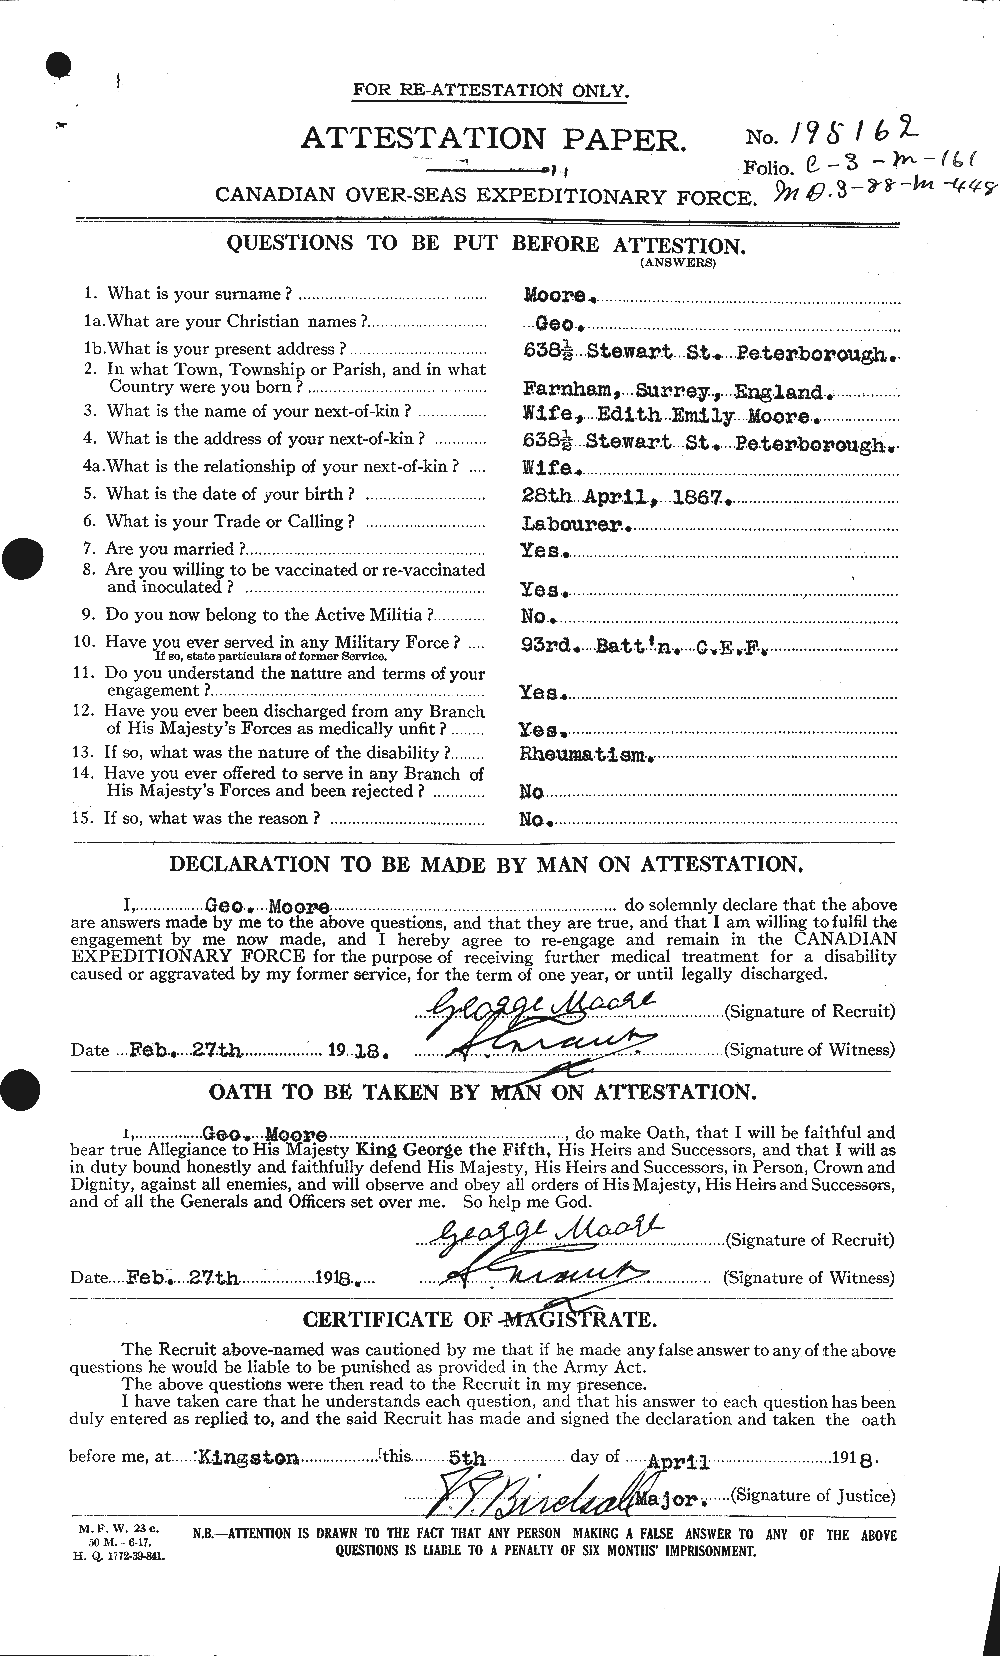 Personnel Records of the First World War - CEF 509414a